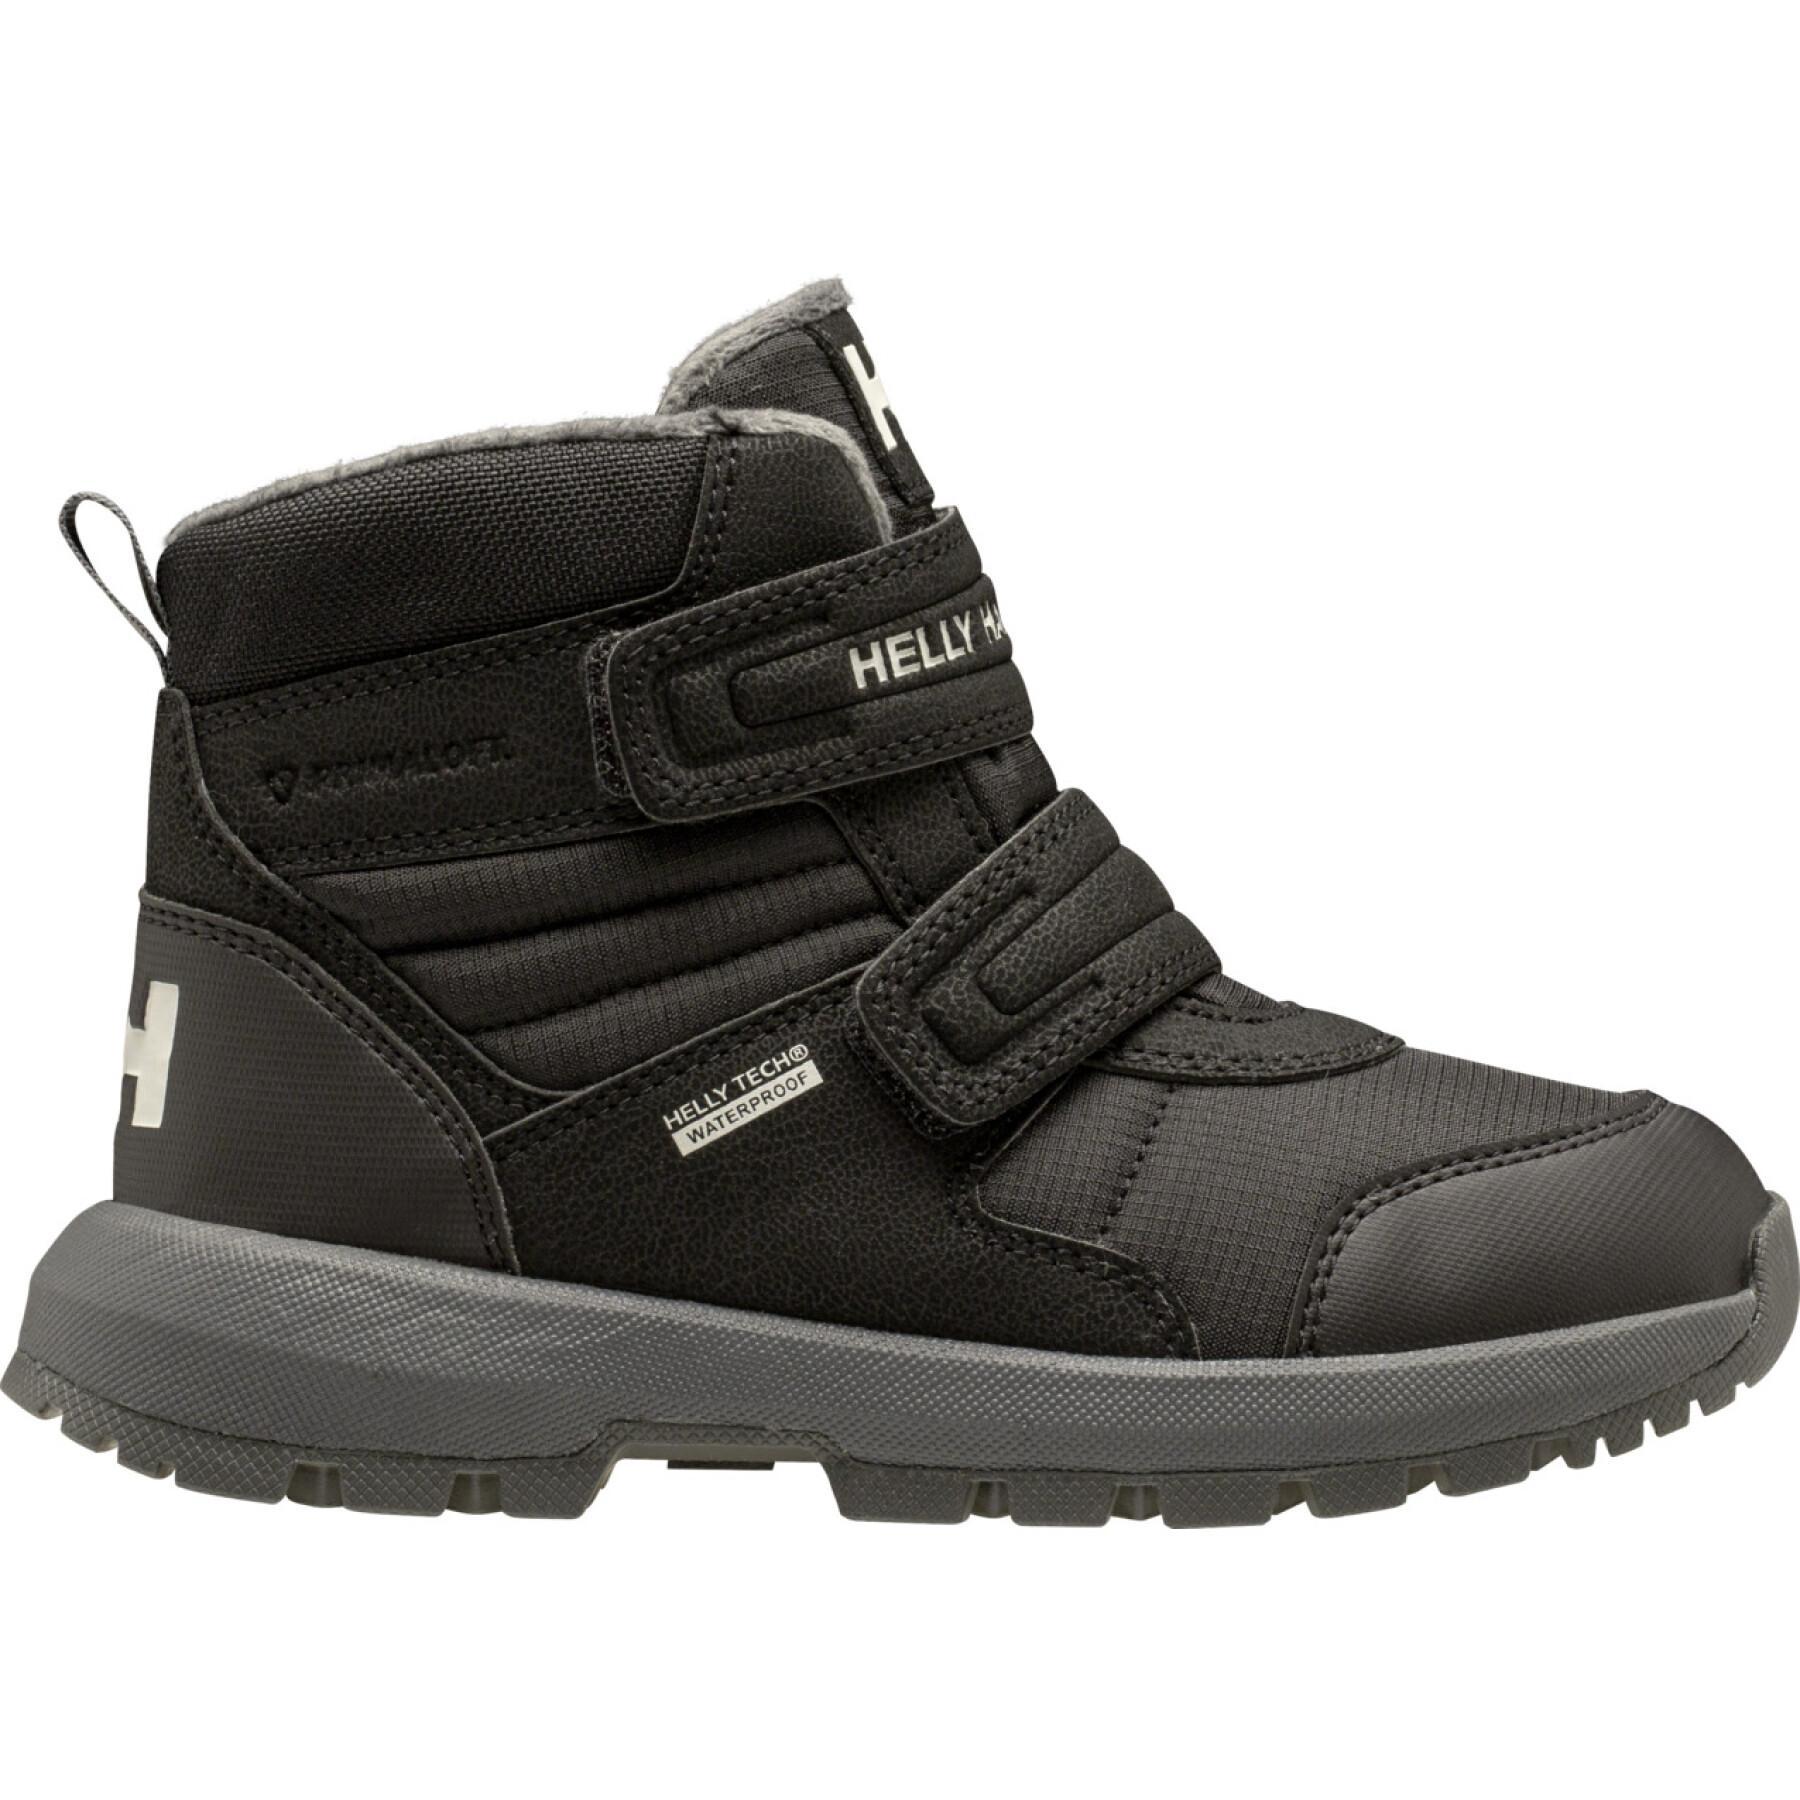 Stivale invernale per bambini Helly Hansen Bowstring Ht